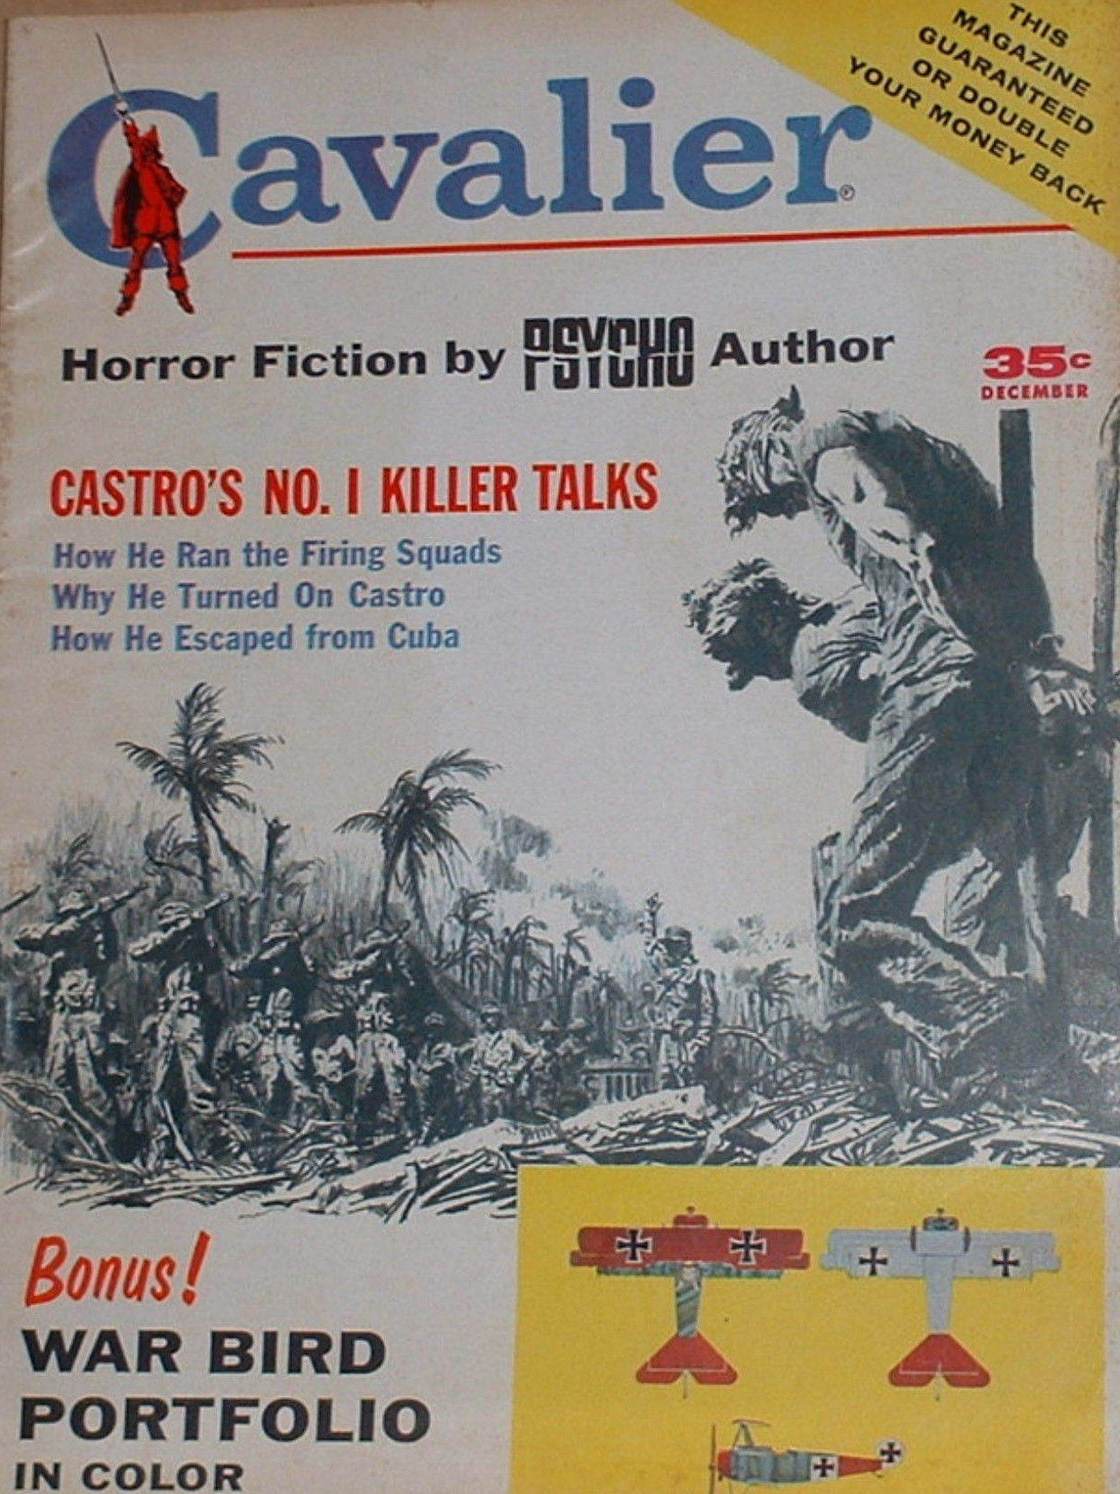 Cavalier December 1960 magazine back issue Cavalier magizine back copy Cavalier December 1960 Adult Magazine Back Issue Published by Fawcett Publications and Founded in 1952. Horror Fiction By Psycho Author.